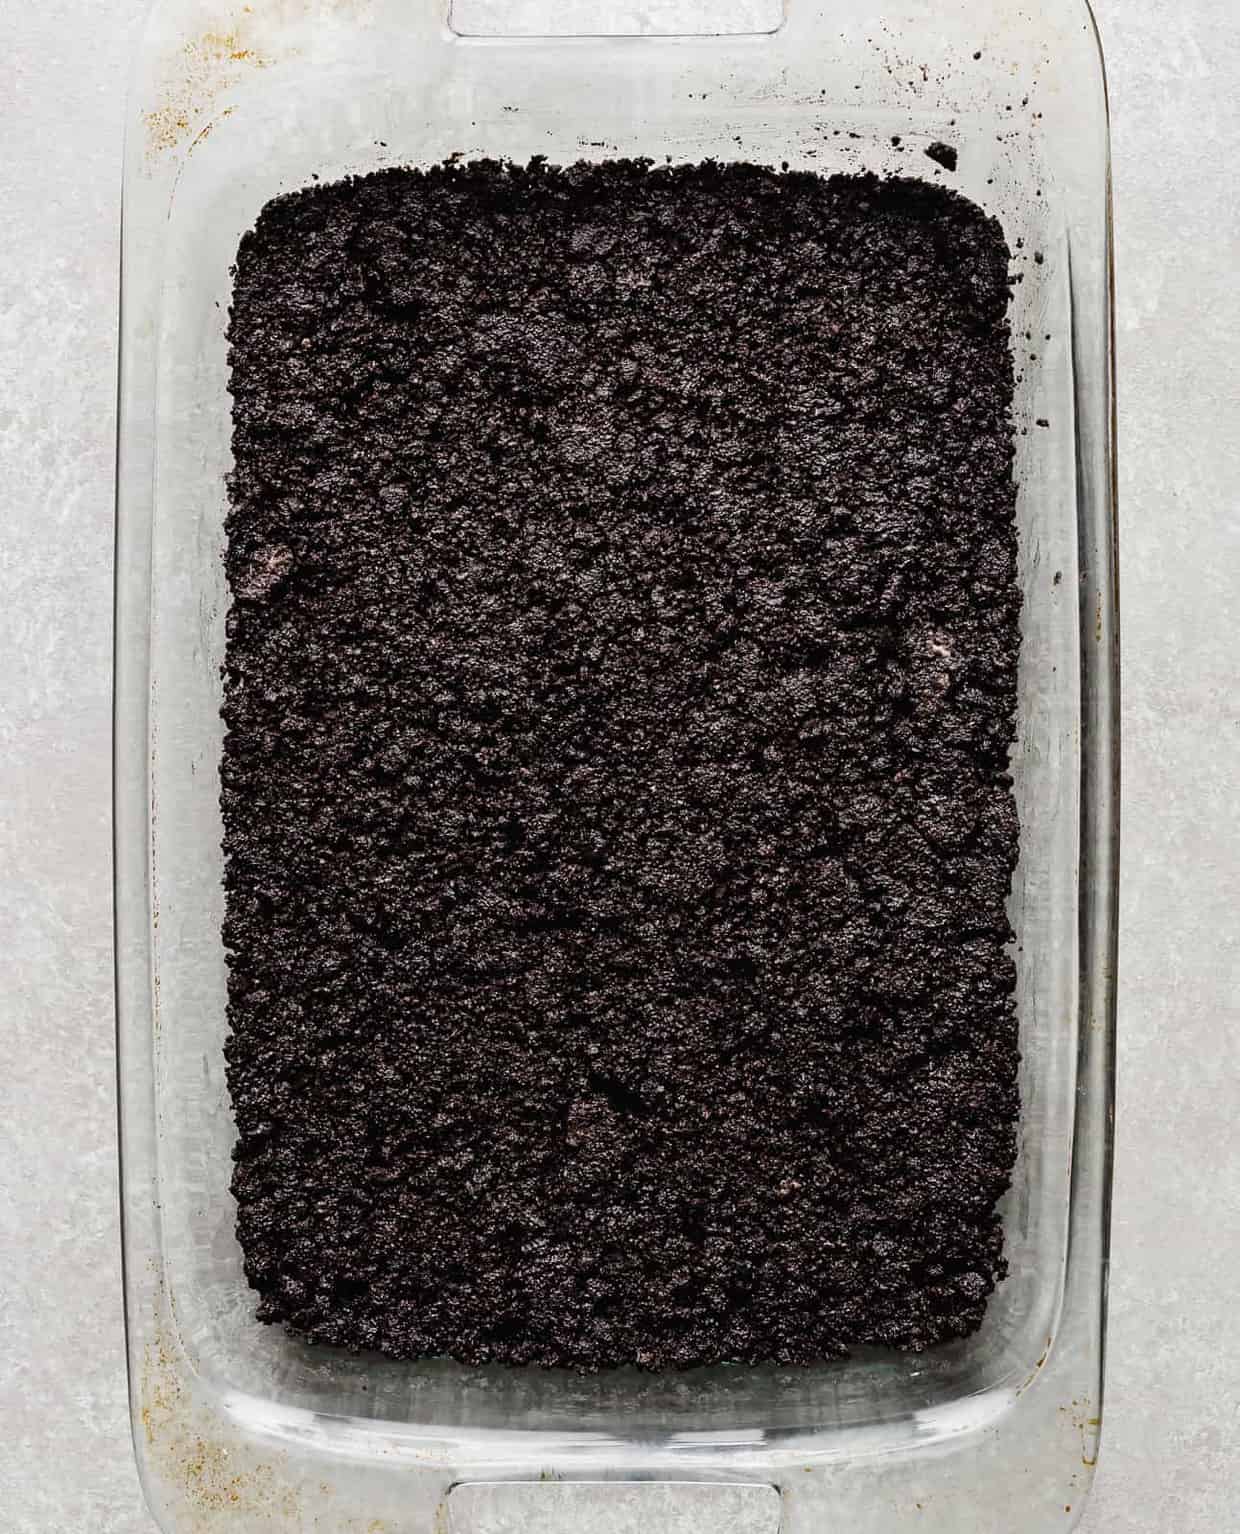 An oreo crust filling the bottom of a 13 inch by 9 inch pan.